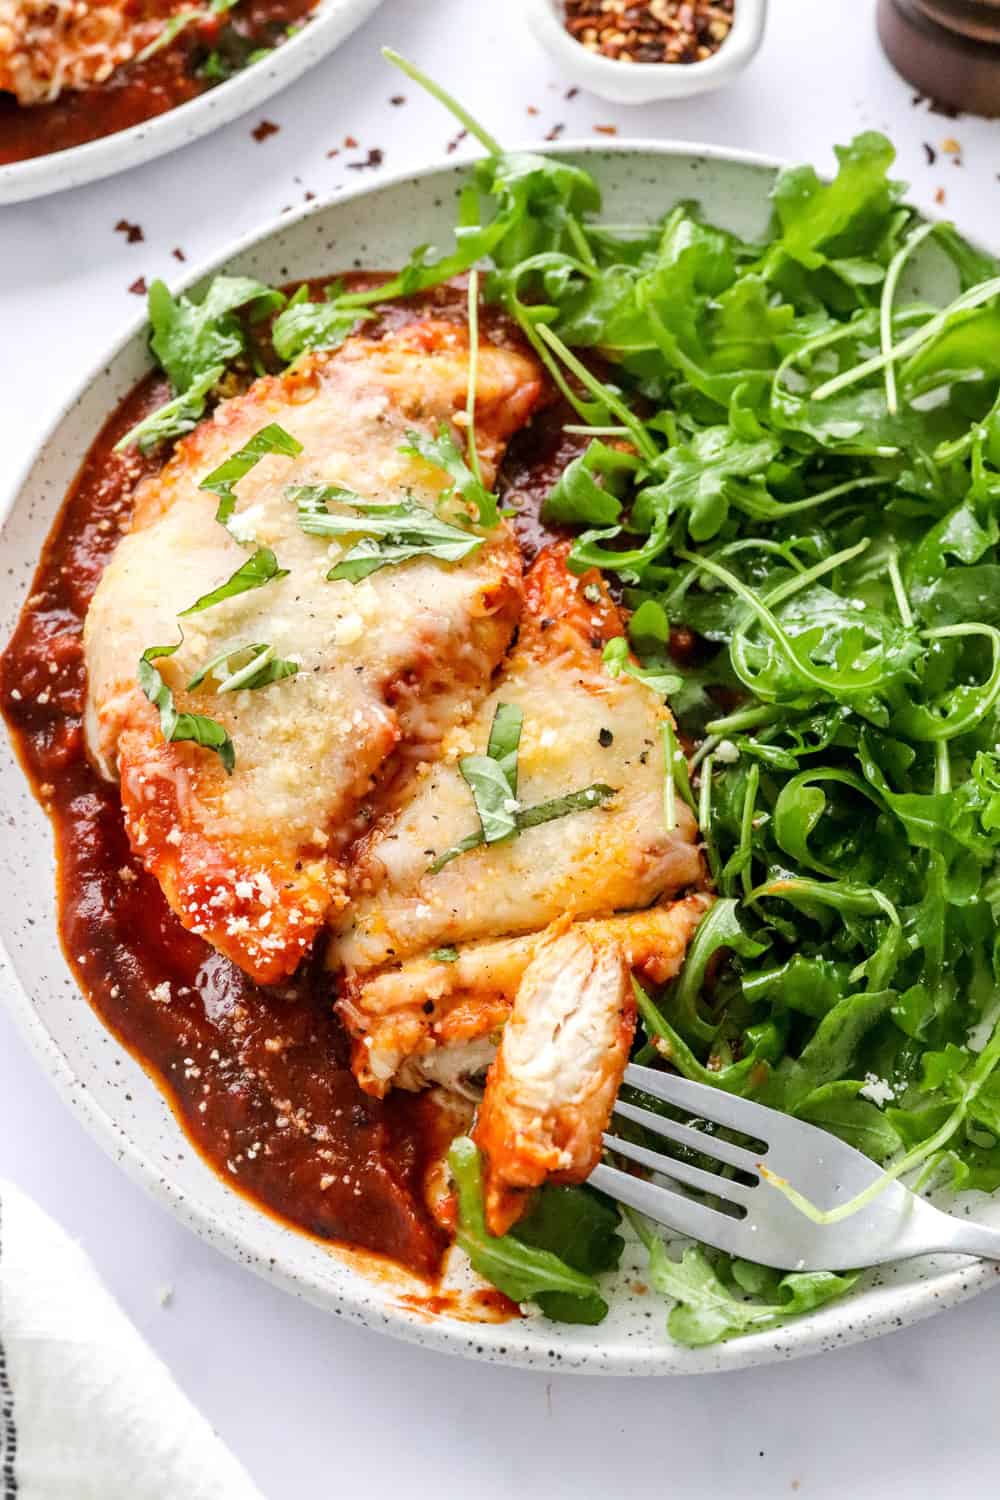 Chicken cooked in tomato sauce topped with melted cheese on a plate next to an arugula salad with a form on the plate